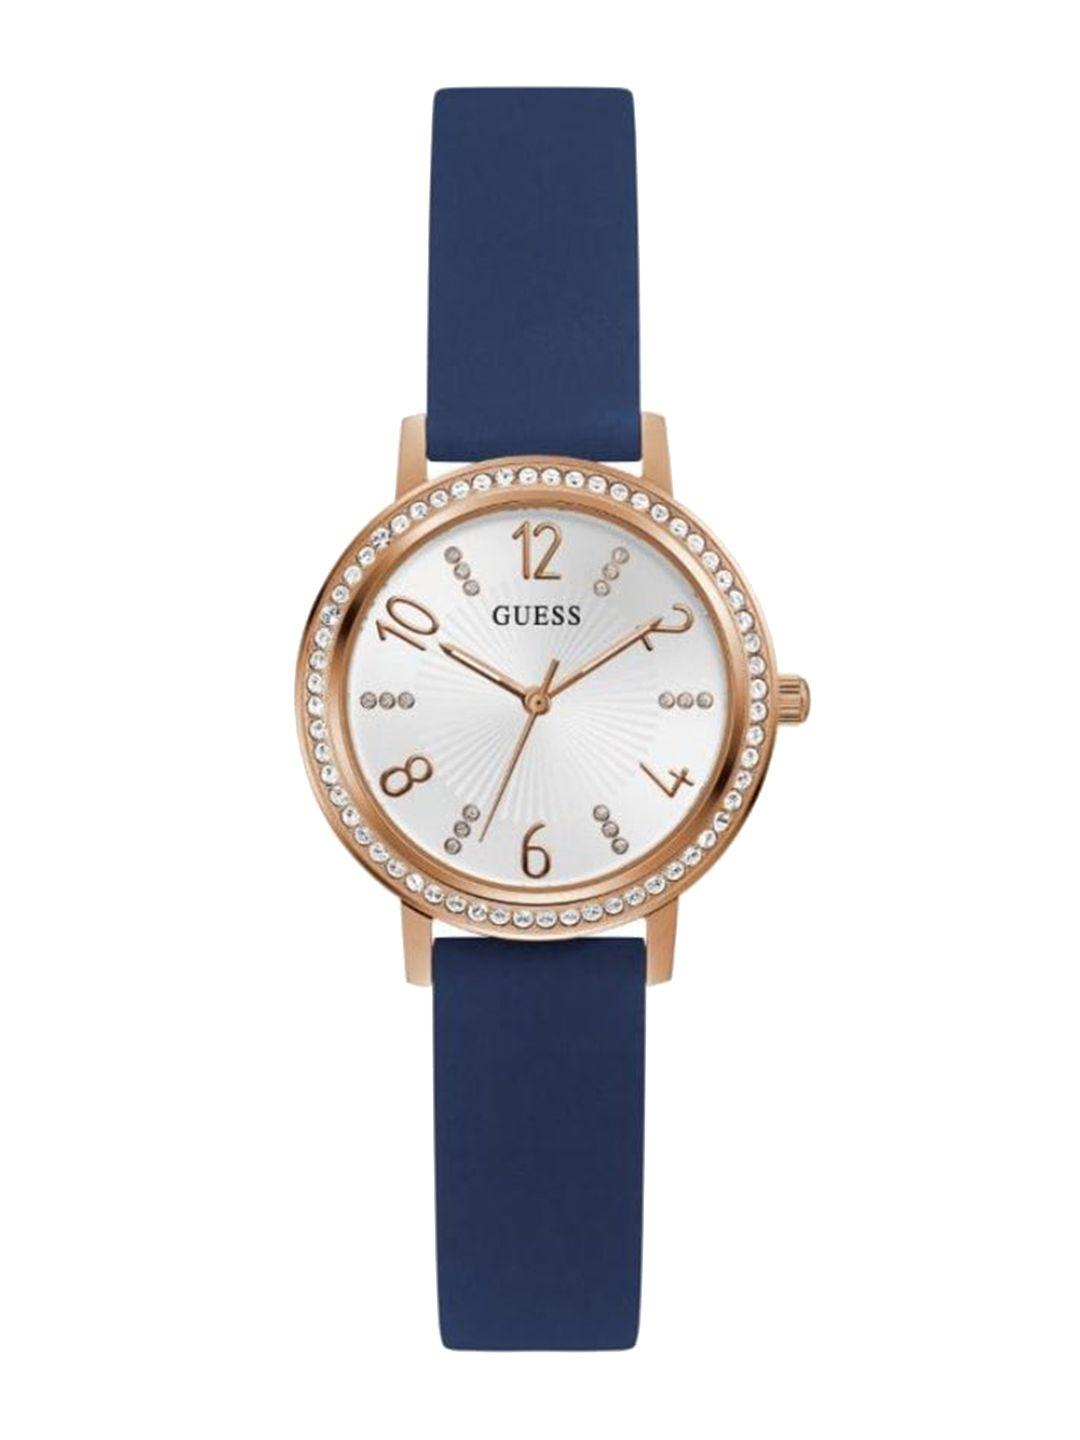 guess-women-rose-gold-toned-embellished-leather-straps-analogue-watch